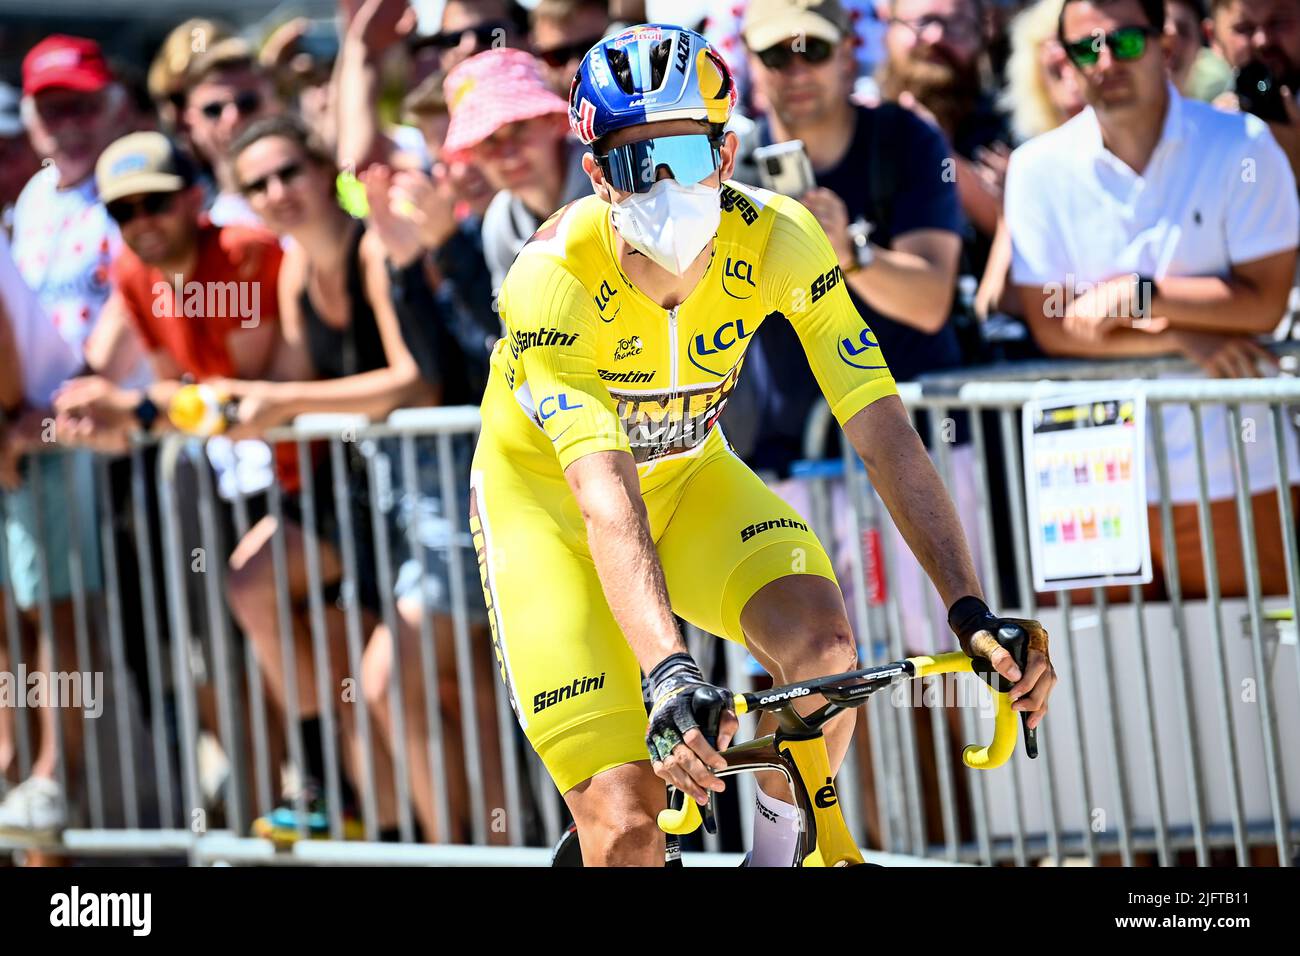 Dunkerque, France. 05th July, 2022. Belgian Wout Van Aert of Team Jumbo-Visma pictured at the start of stage four of the Tour de France cycling race, a 171.5 km race from Dunkerque to Calais, France on Tuesday 05 July 2022. This year's Tour de France takes place from 01 to 24 July 2022. BELGA PHOTO JASPER JACOBS - UK OUT Credit: Belga News Agency/Alamy Live News Stock Photo